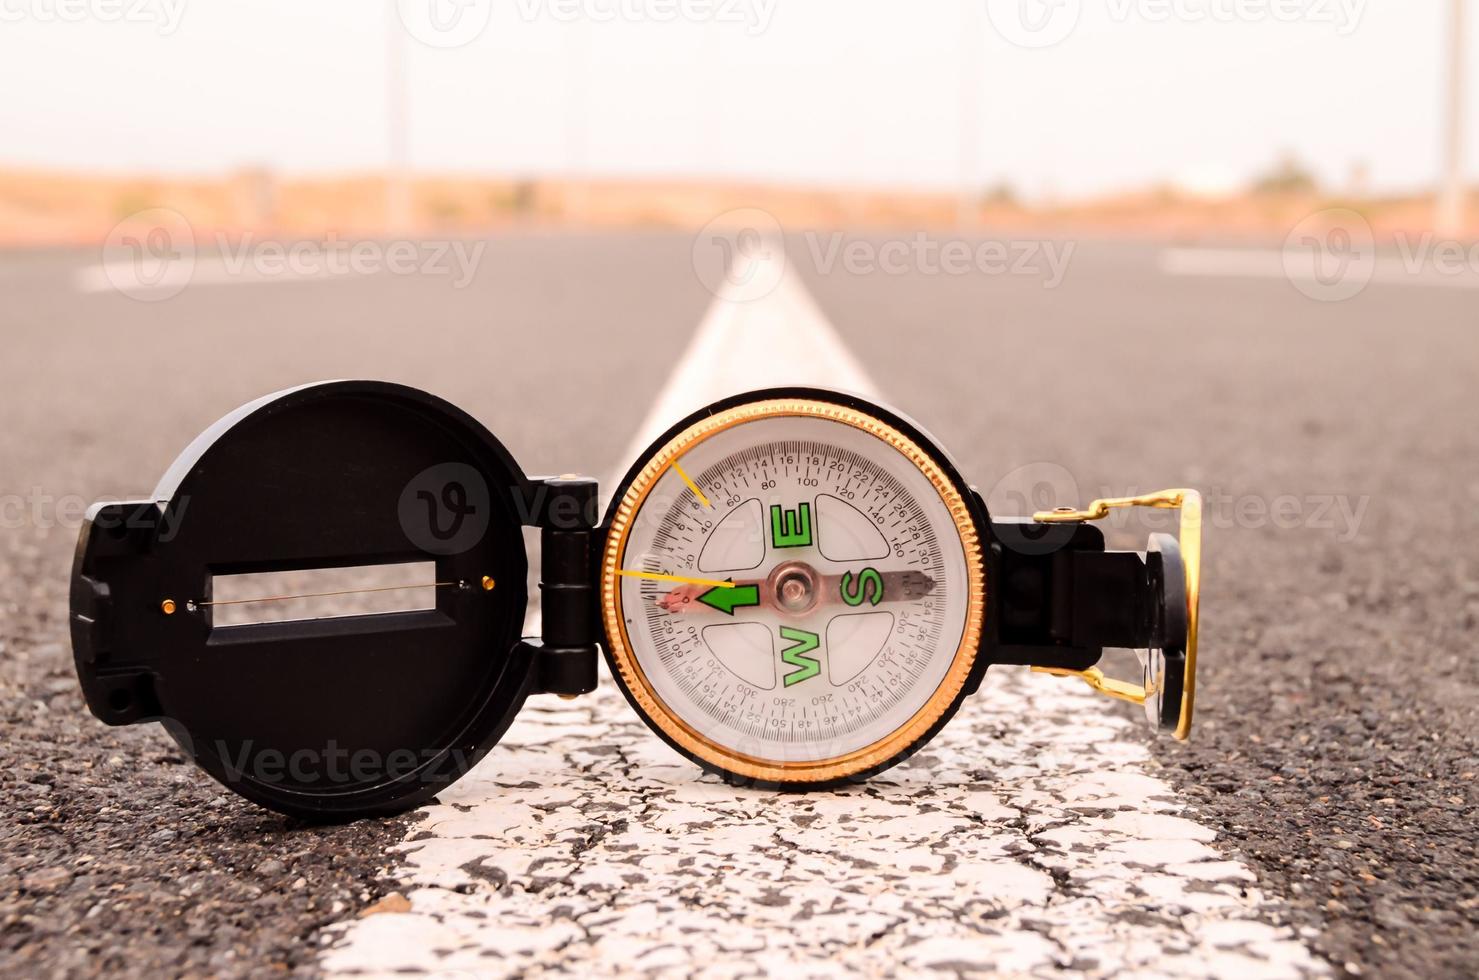 Compass on the road photo